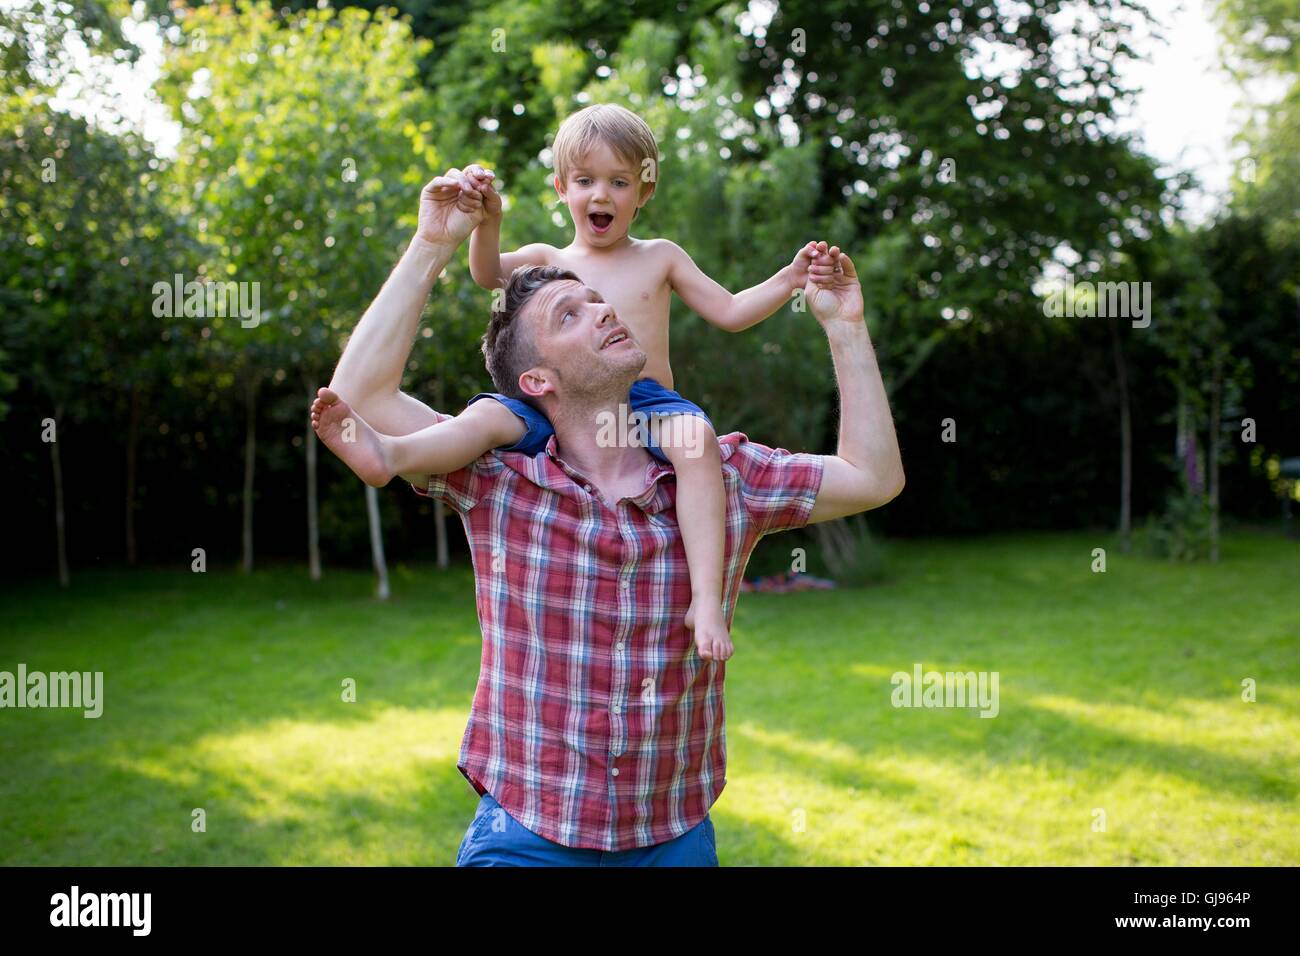 PROPERTY RELEASED. MODEL RELEASED. Father carrying son on his shoulders in the garden. Stock Photo